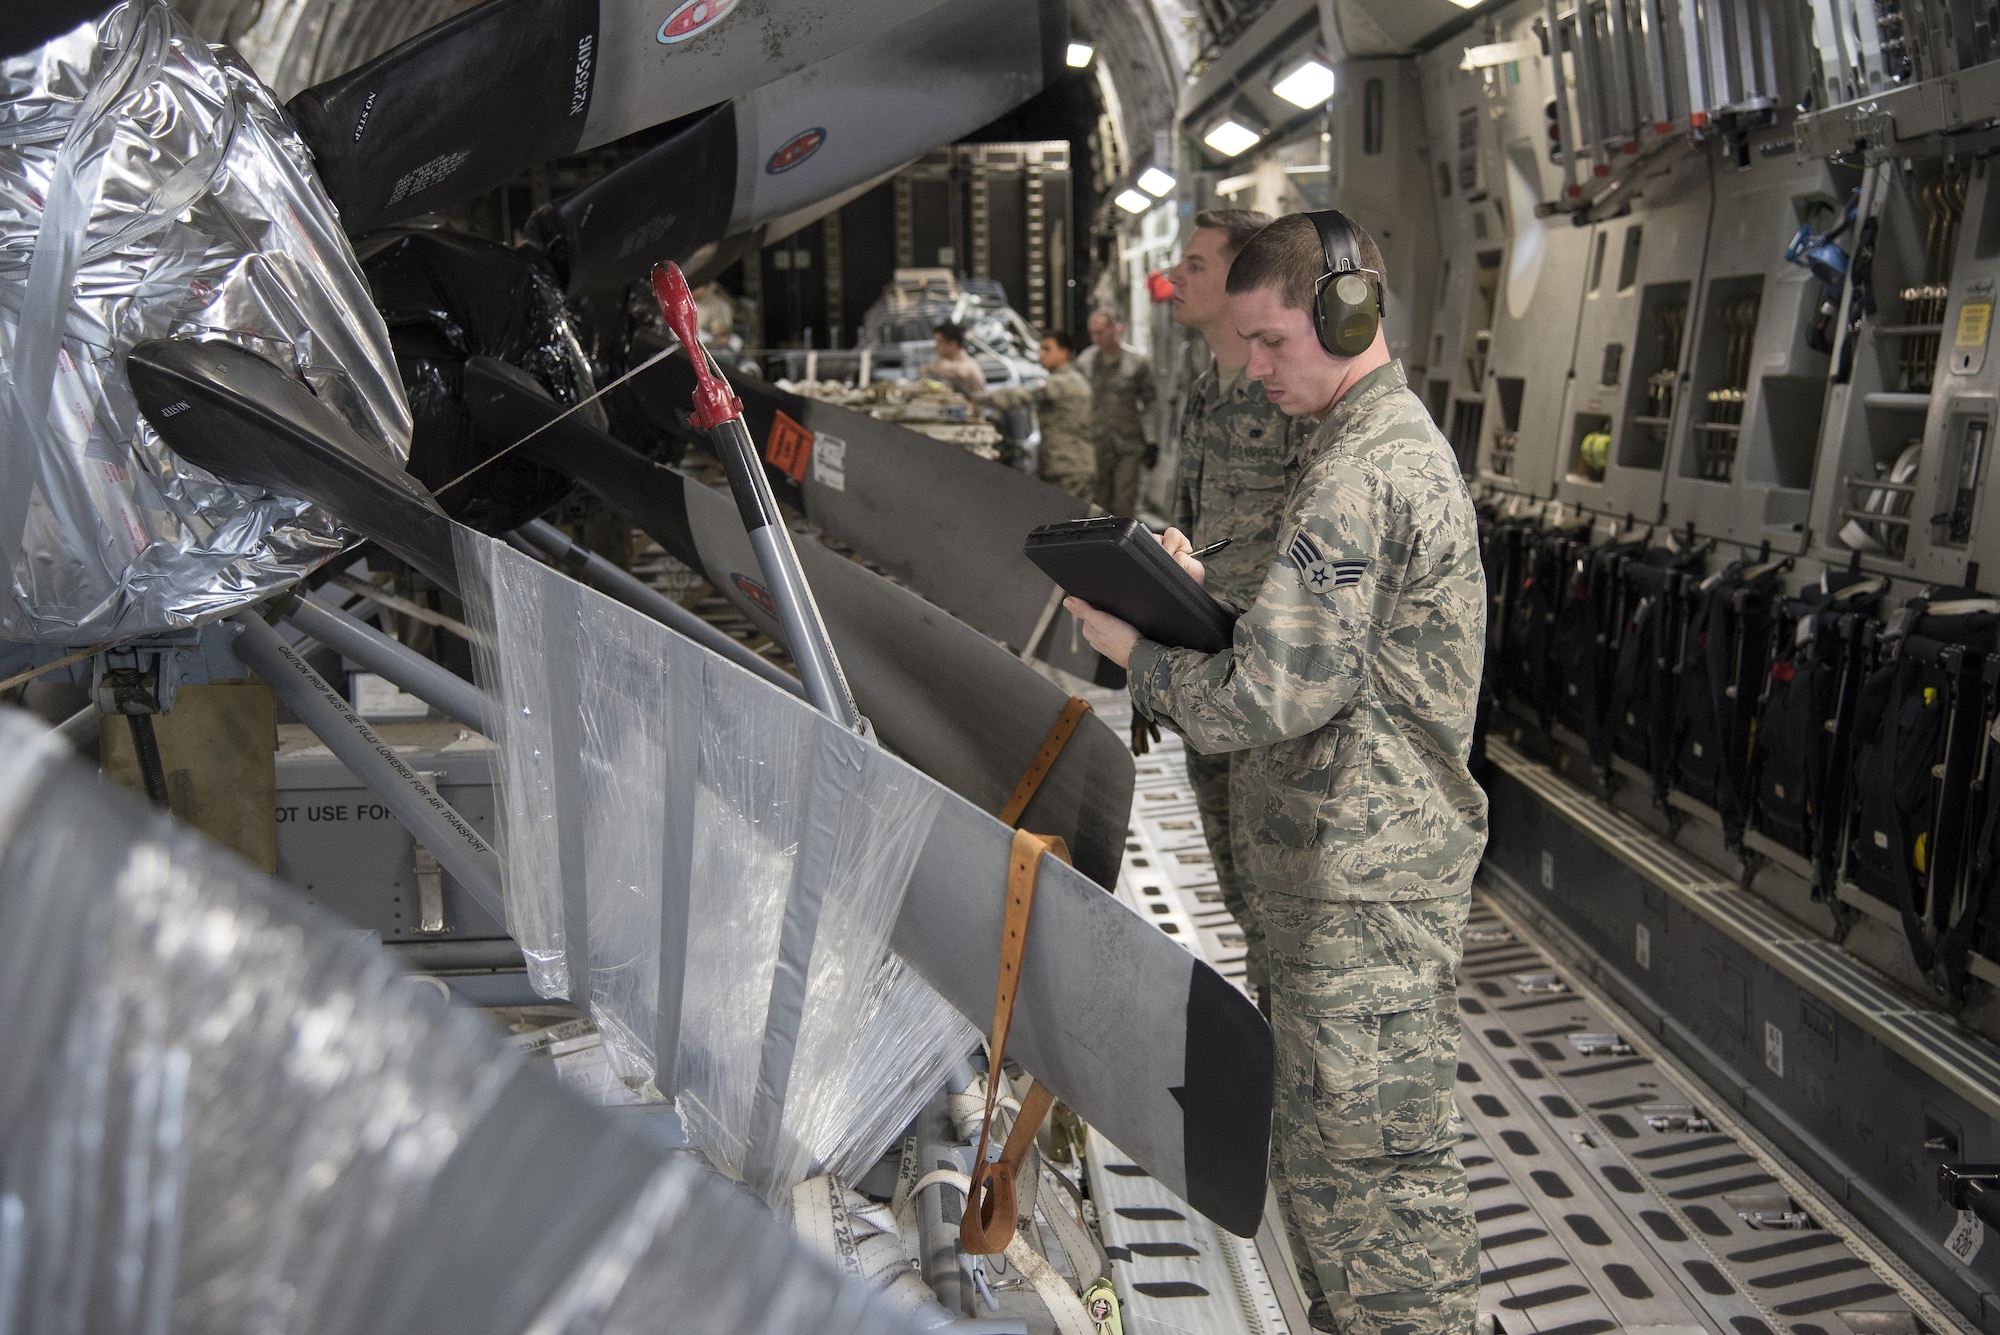 An aerial port expediter assigned to the 436th Aerial Port Squadron confirms the manifest on a C-17 Globemaster III in preparation for an offload at Dover Air Force Base, Del. Careful attention to manifests ensures all cargo is accounted for at every stage of transportation. (U.S. Air Force photo by Senior Airman Aaron J. Jenne)